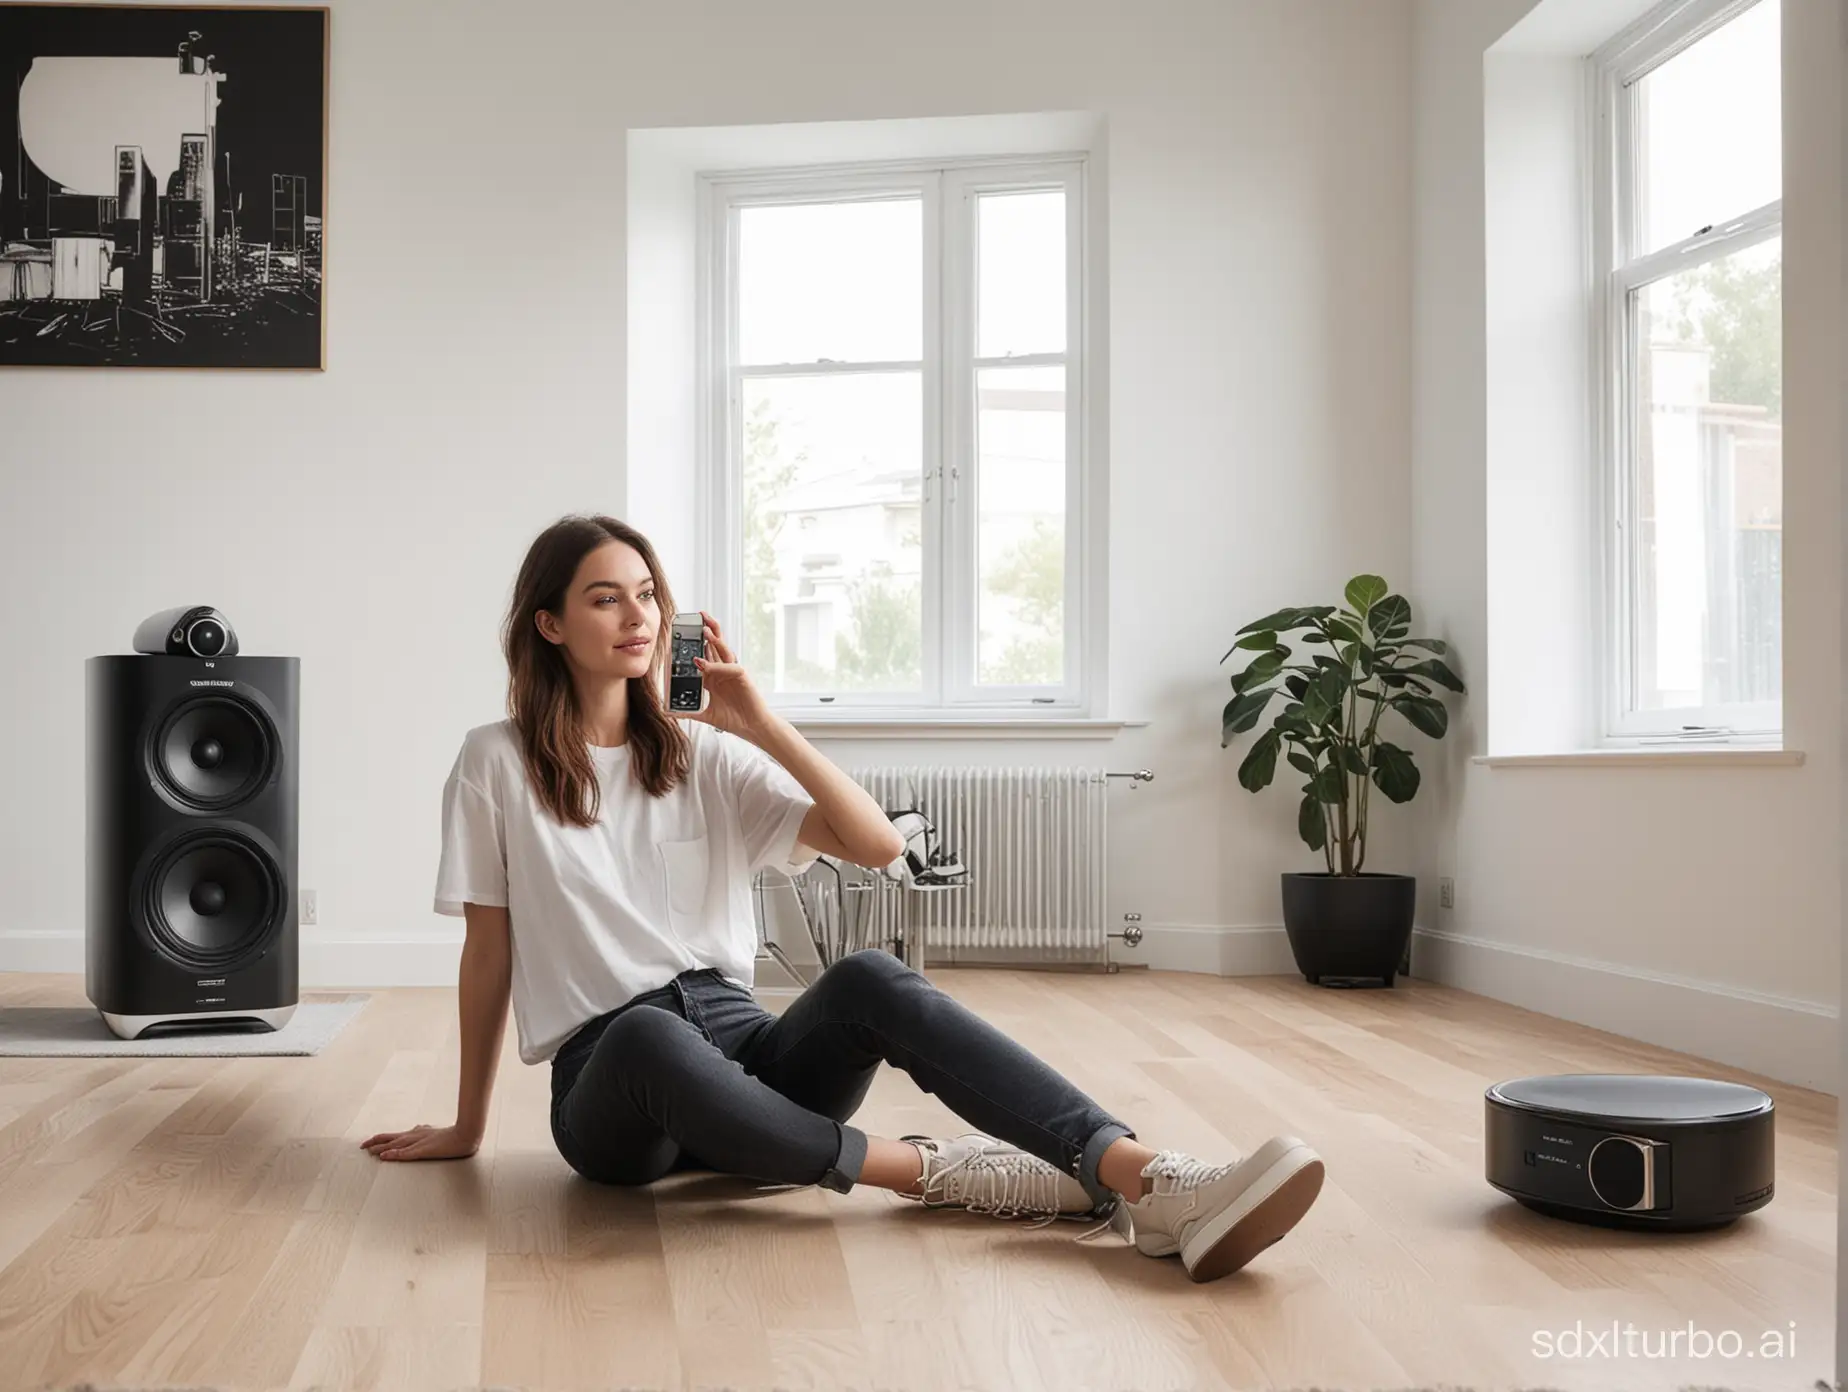 A girl is sitting on the floor at home taking a selfie. In the background are Bowers & Wilkins 802 d3 Speaker, McIntosh amplifier, white walls and white windows.